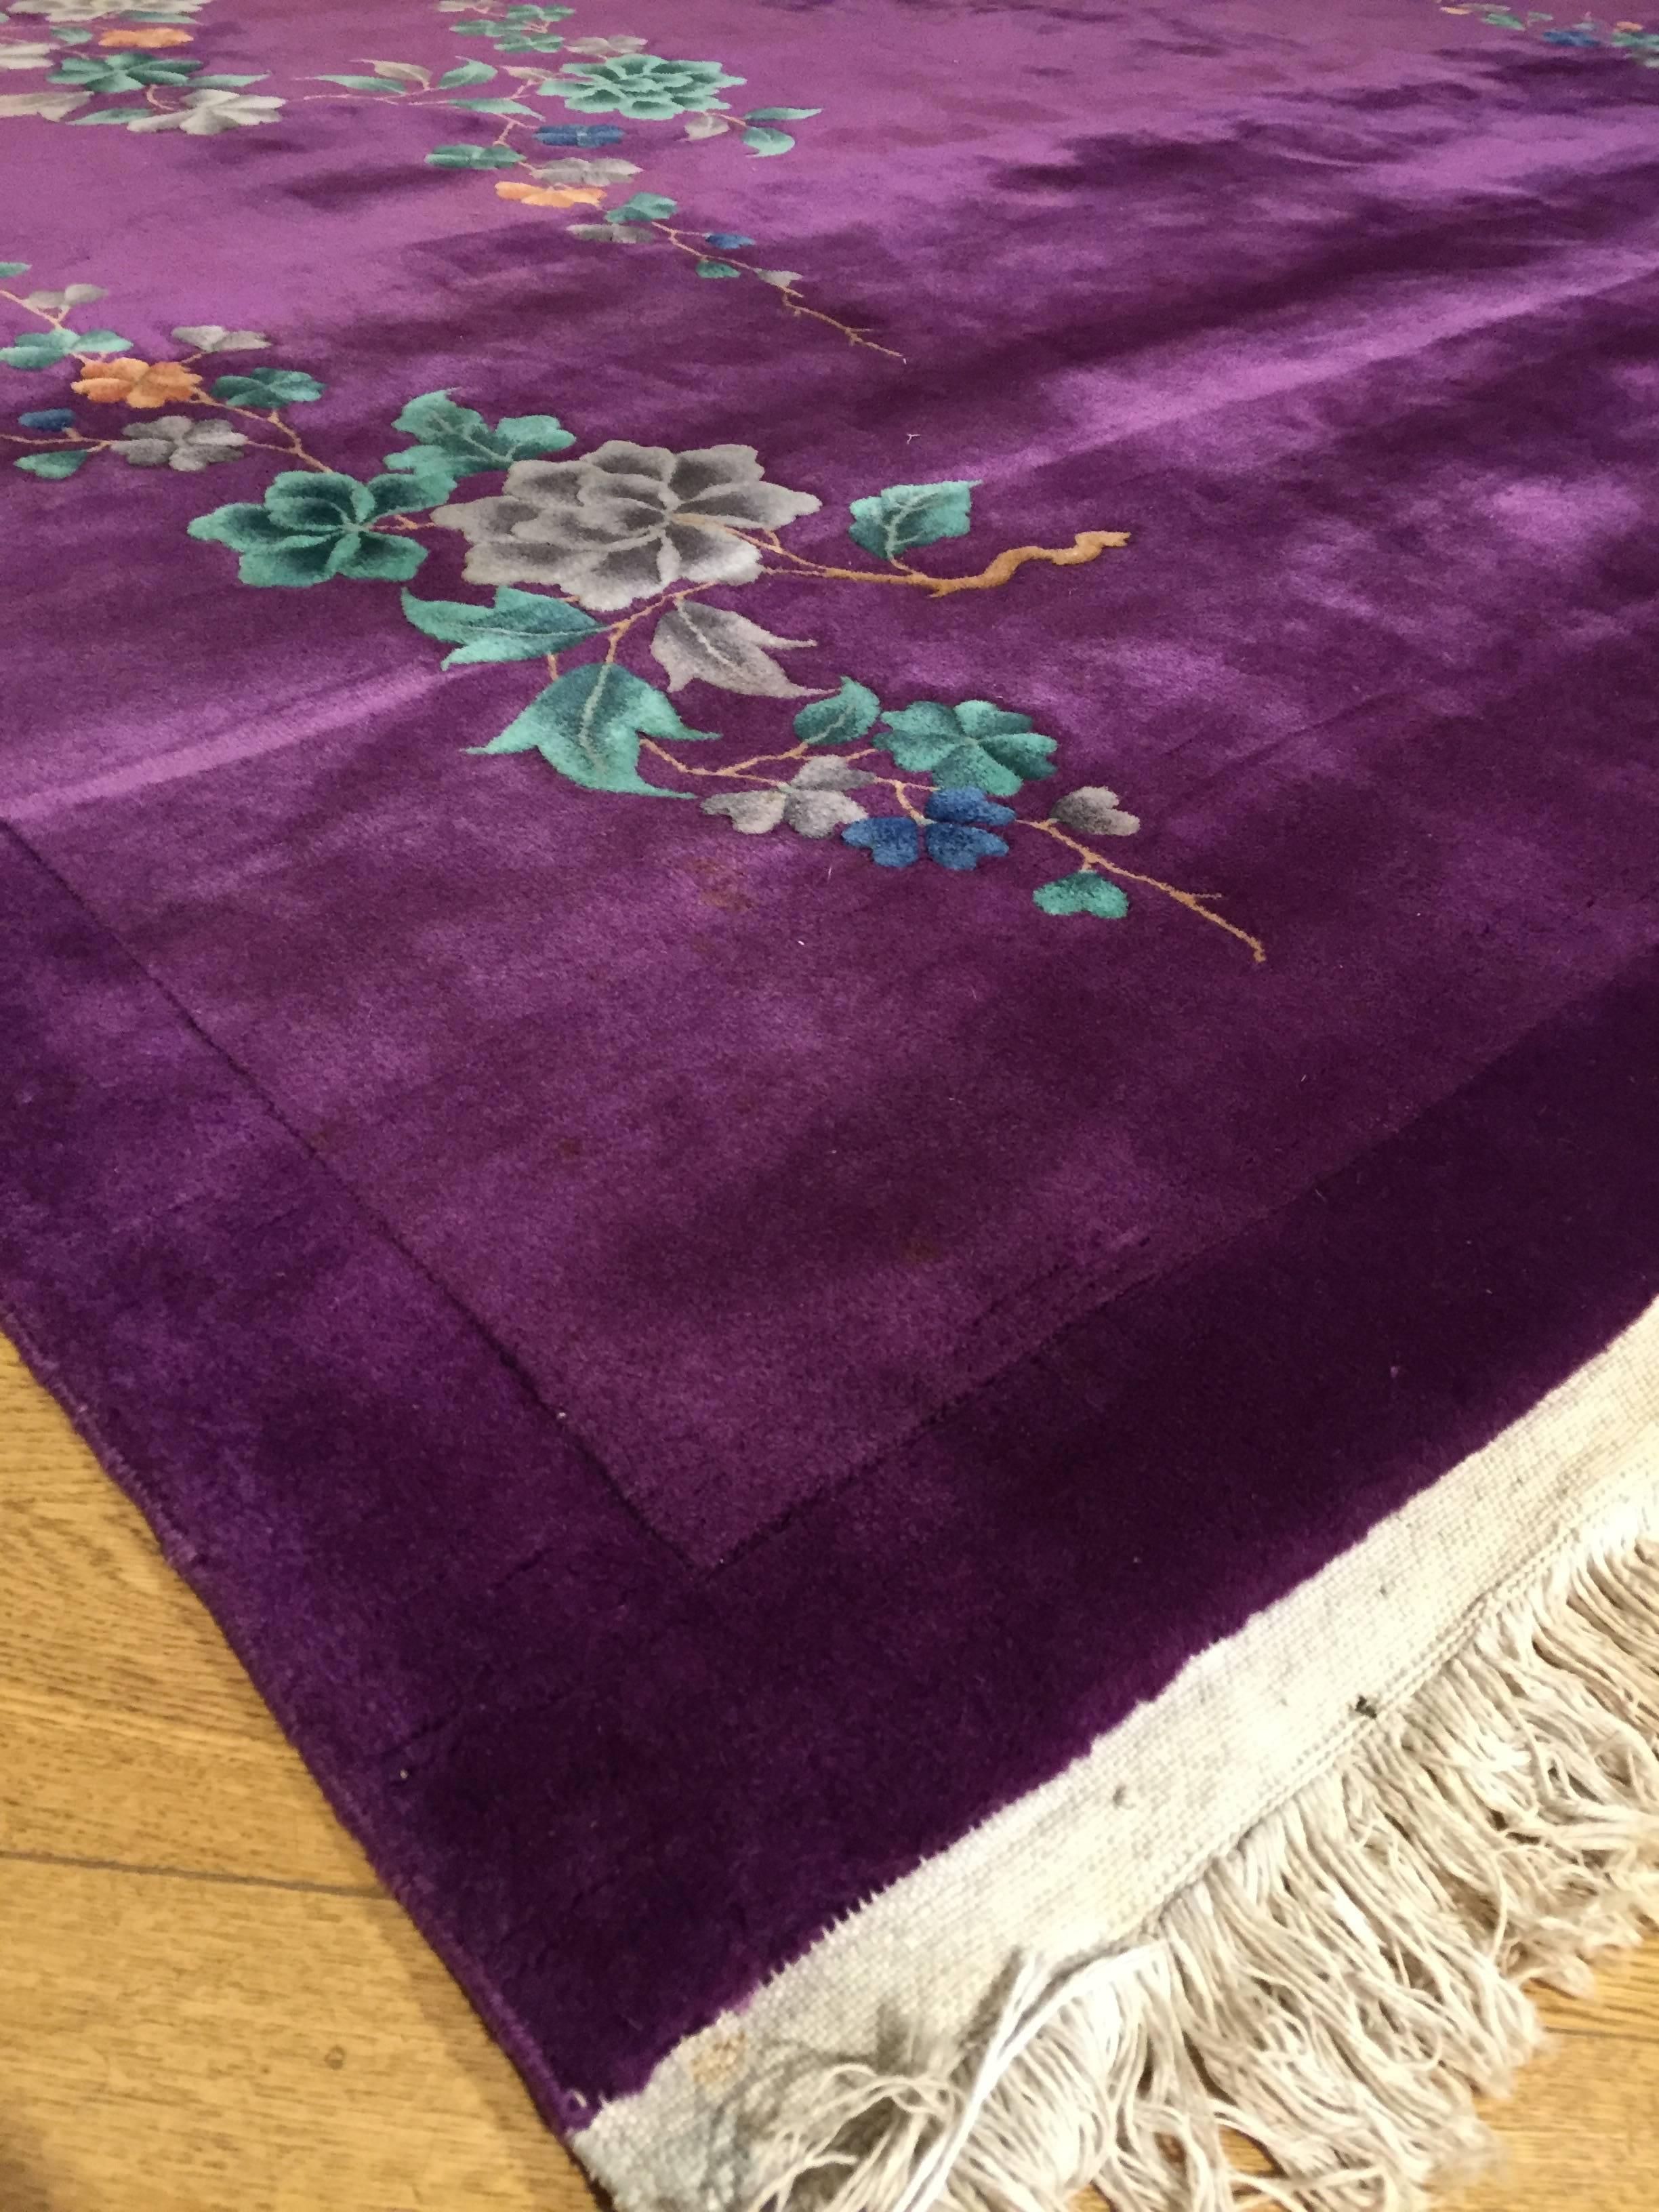 20th Century 1920-1940 Nichols Art Deco Chinese Rug Hand-Knotted Wool Violet 1